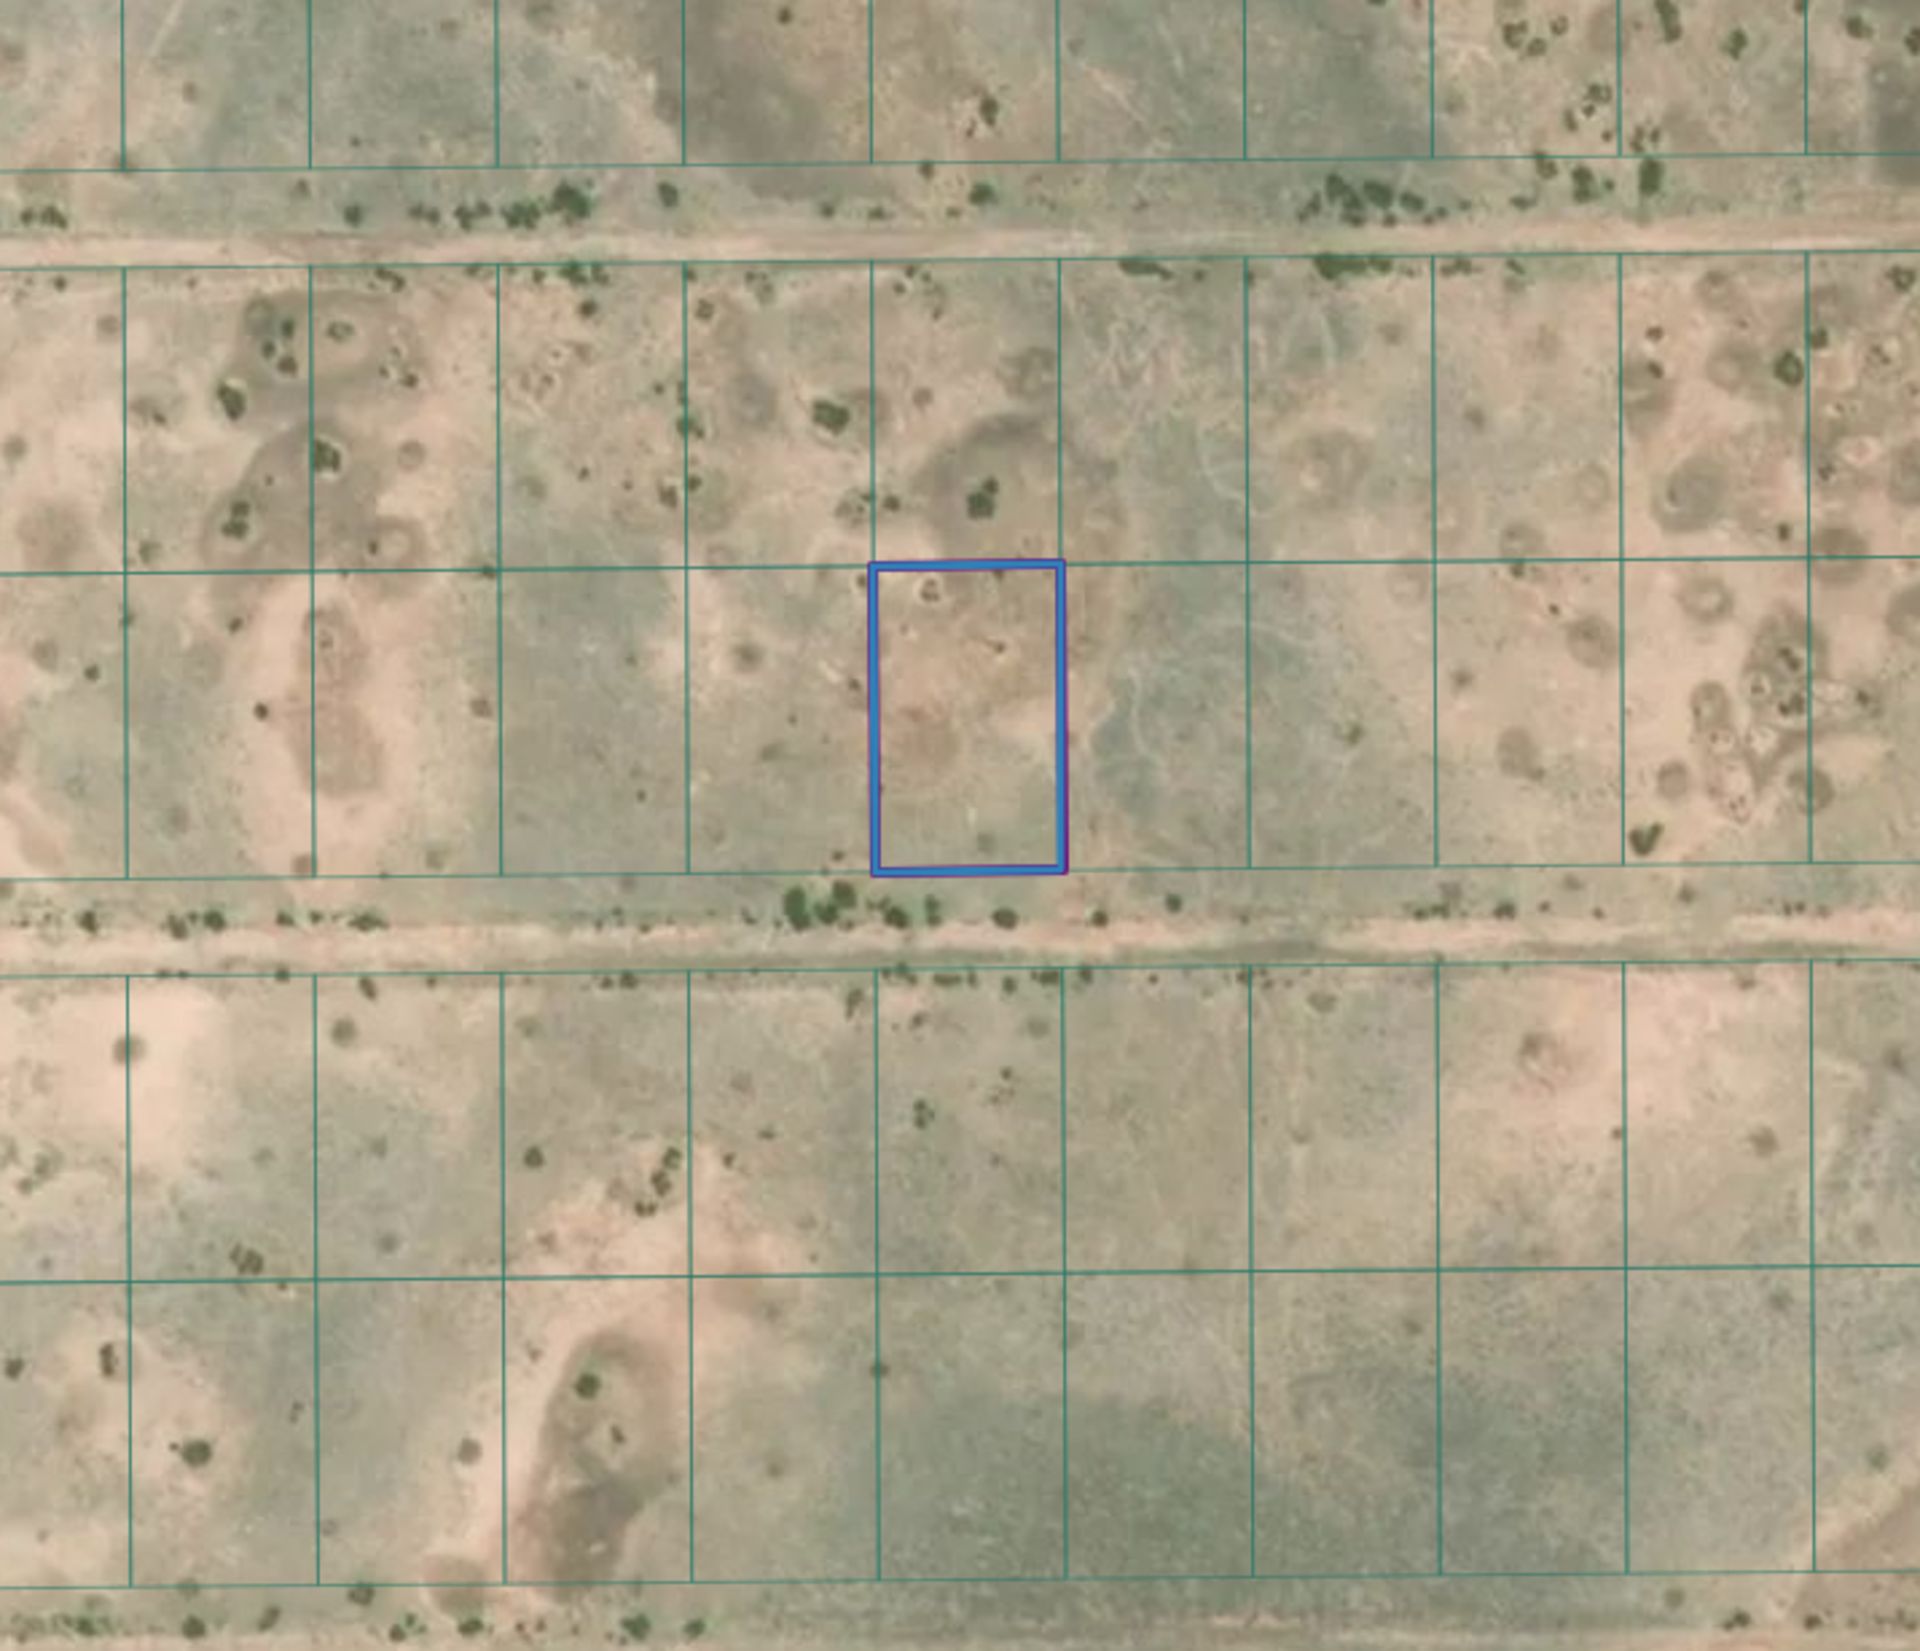 Grab This Half-Acre Lot in Luna County, New Mexico! - Image 7 of 14